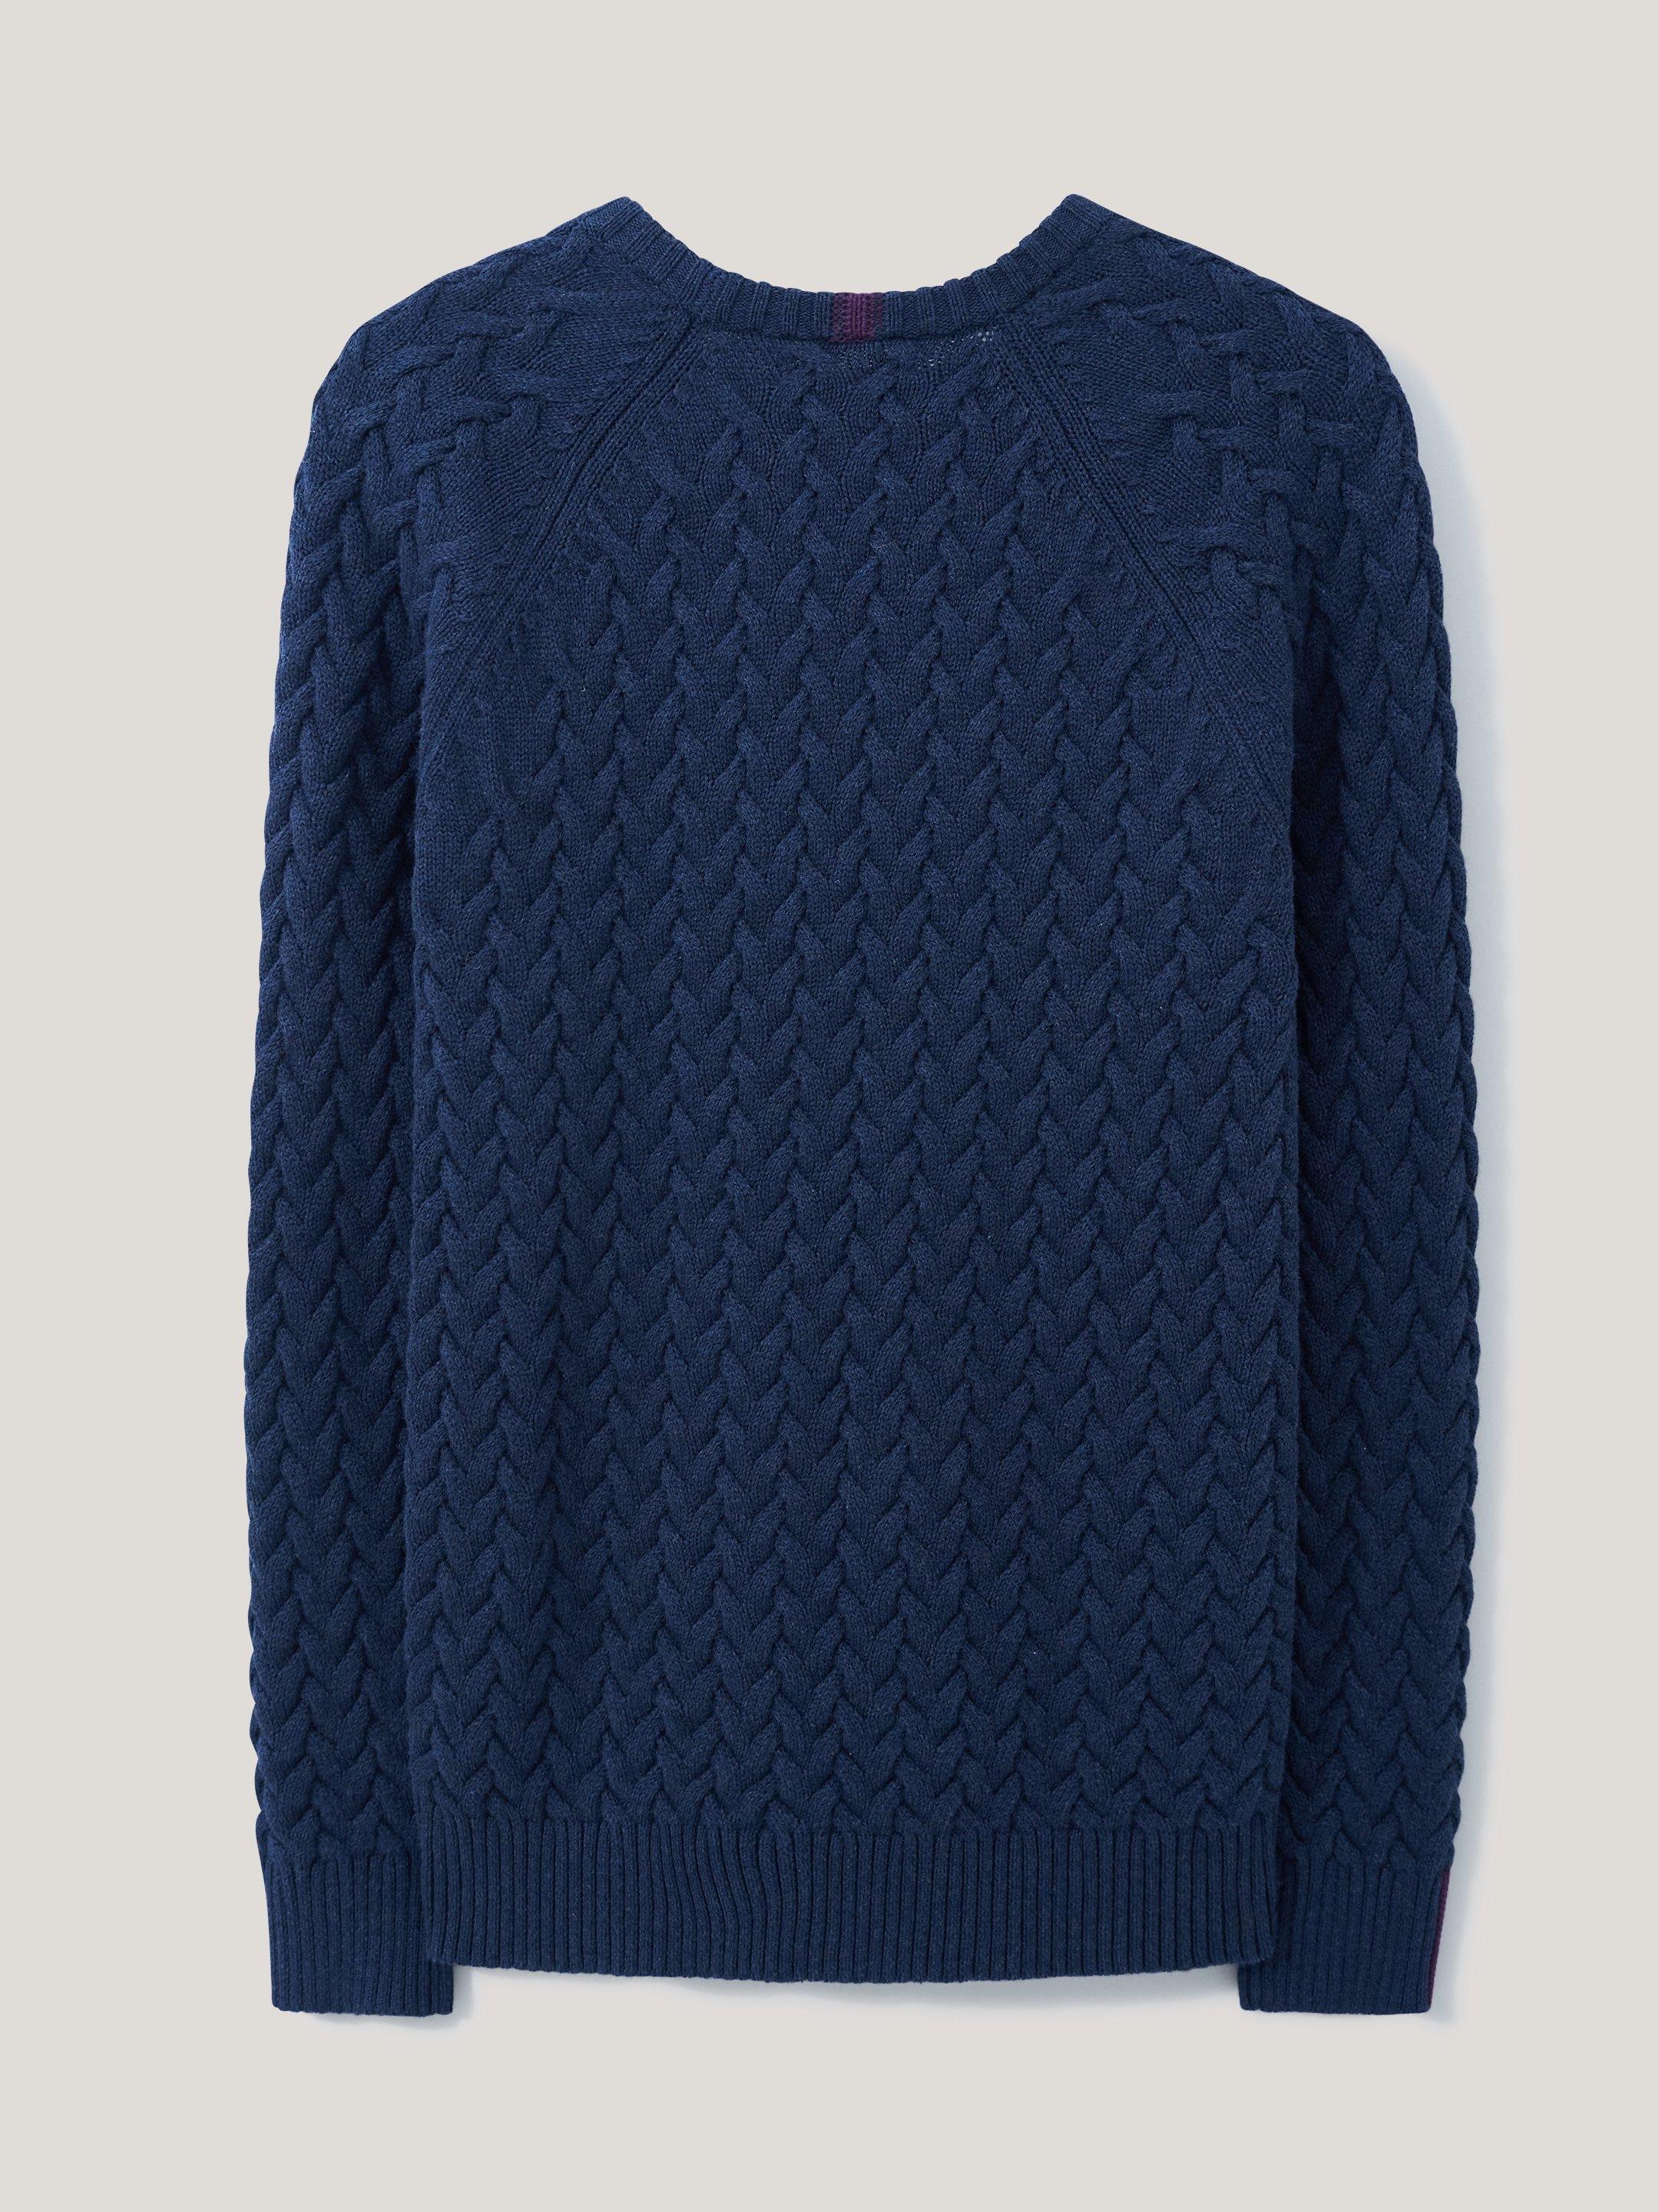 Monmouth Cable in DARK NAVY - FLAT BACK